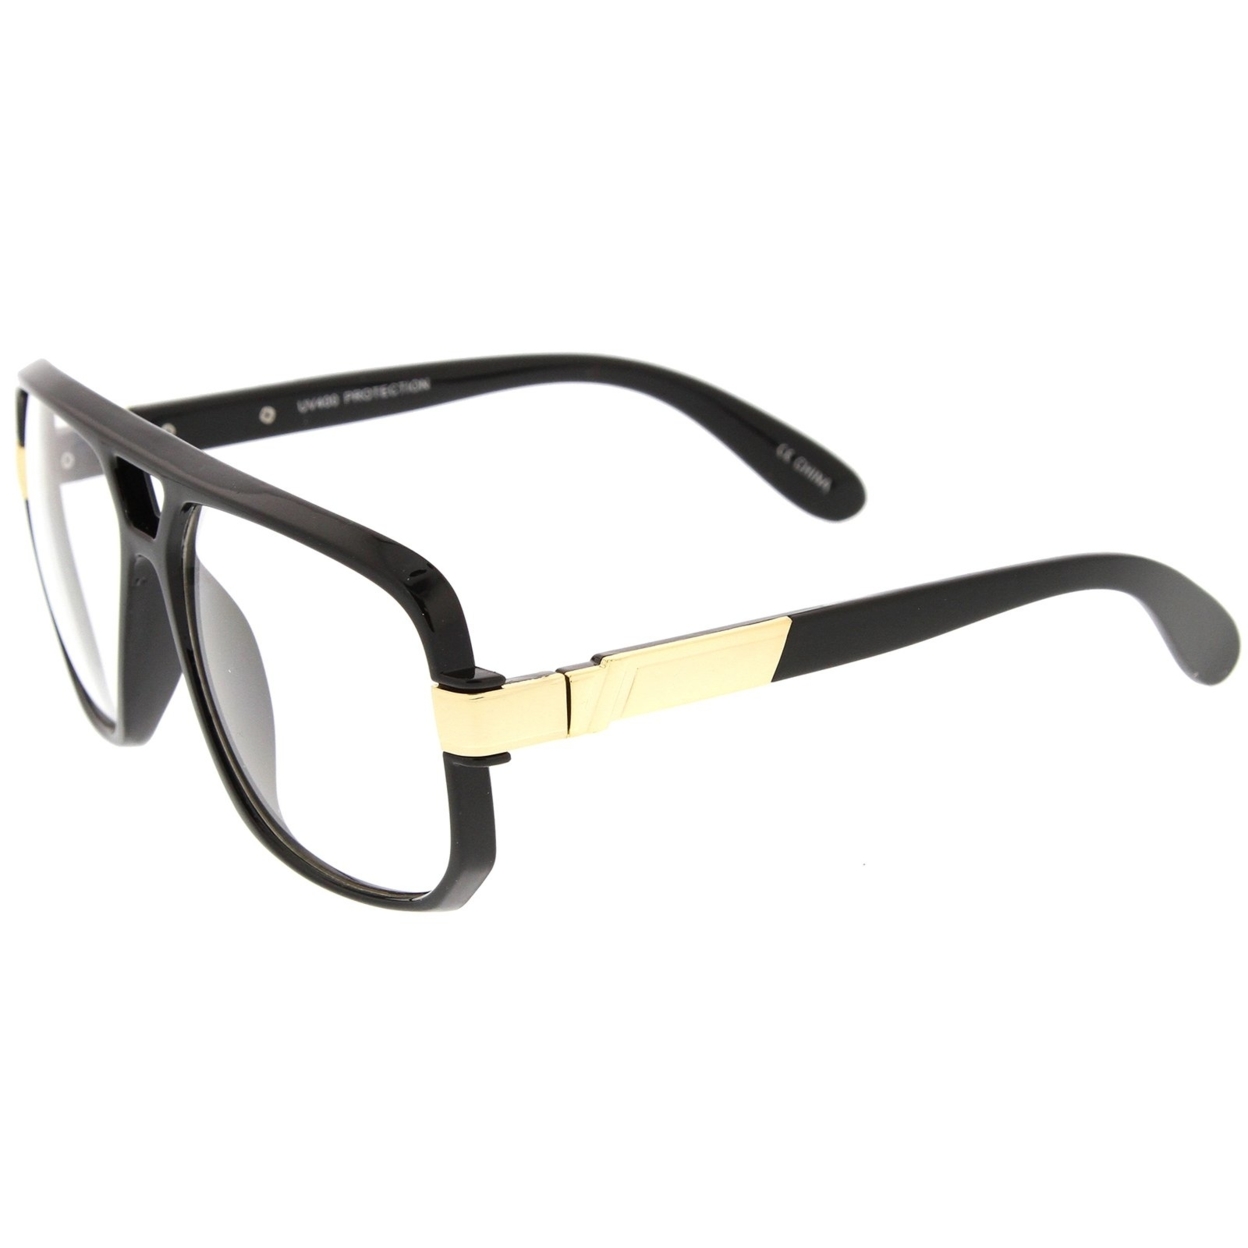 Classic Flat Top Metal Accented Temples Clear Lens Square Aviator Glasses 56mm - Tortoise-Gold / Clear